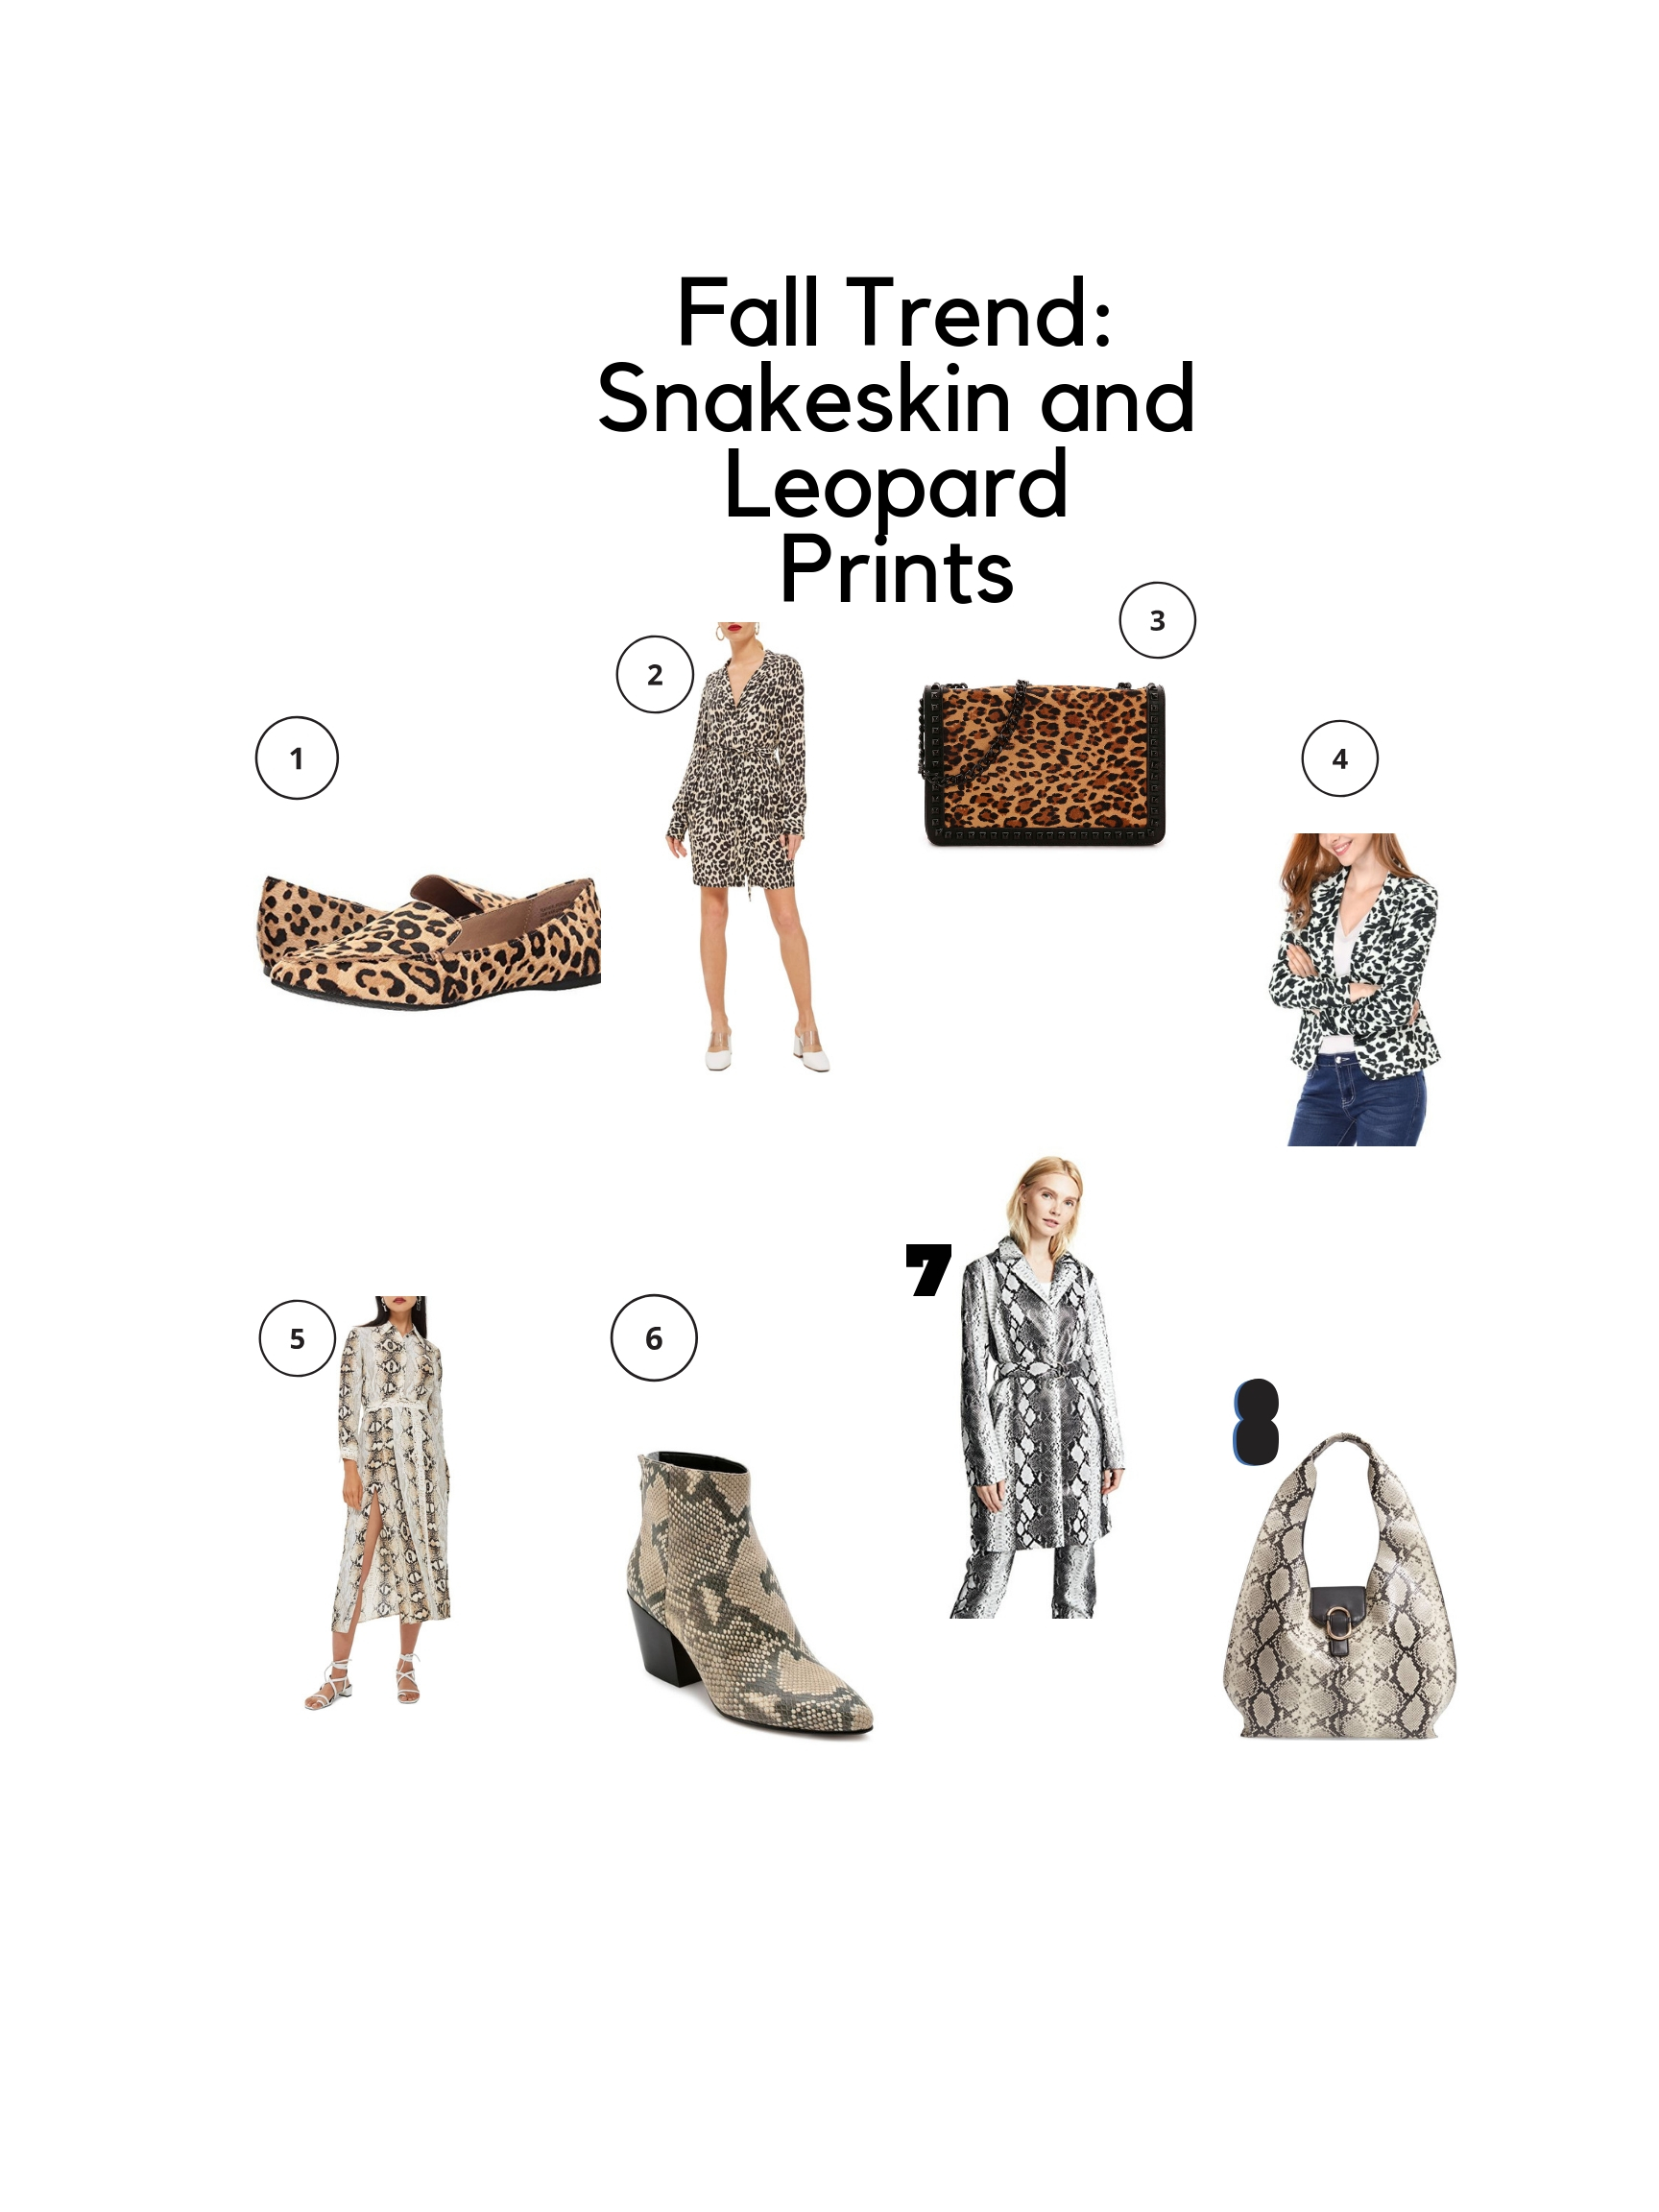 Fall Trend: Snakeskin and Leopard Prints